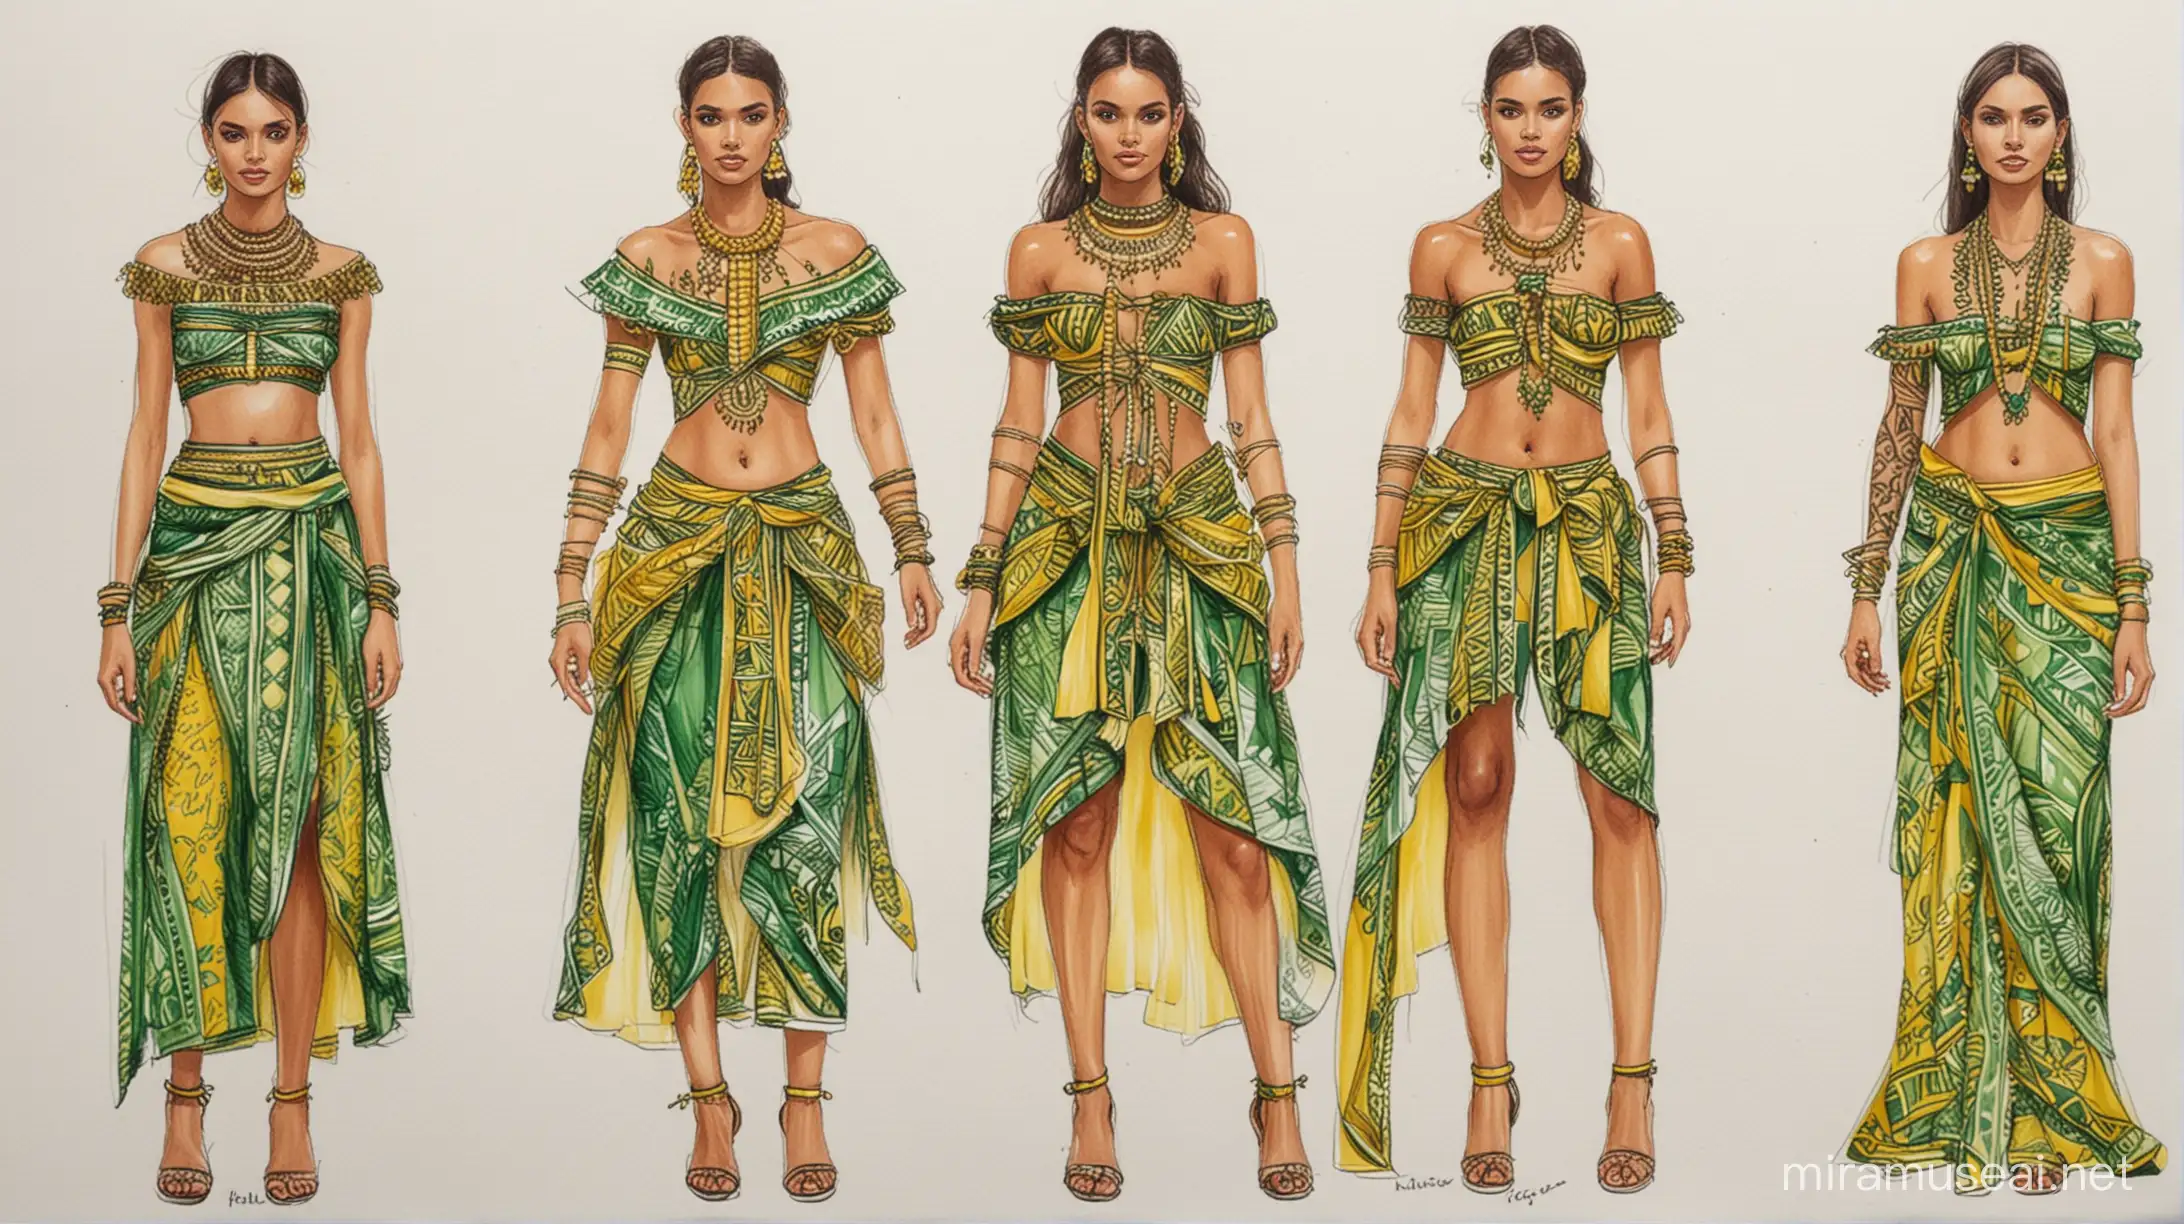 Exotic Hiva OaInspired Fashion Collection Lush Greens and Sunny Yellows